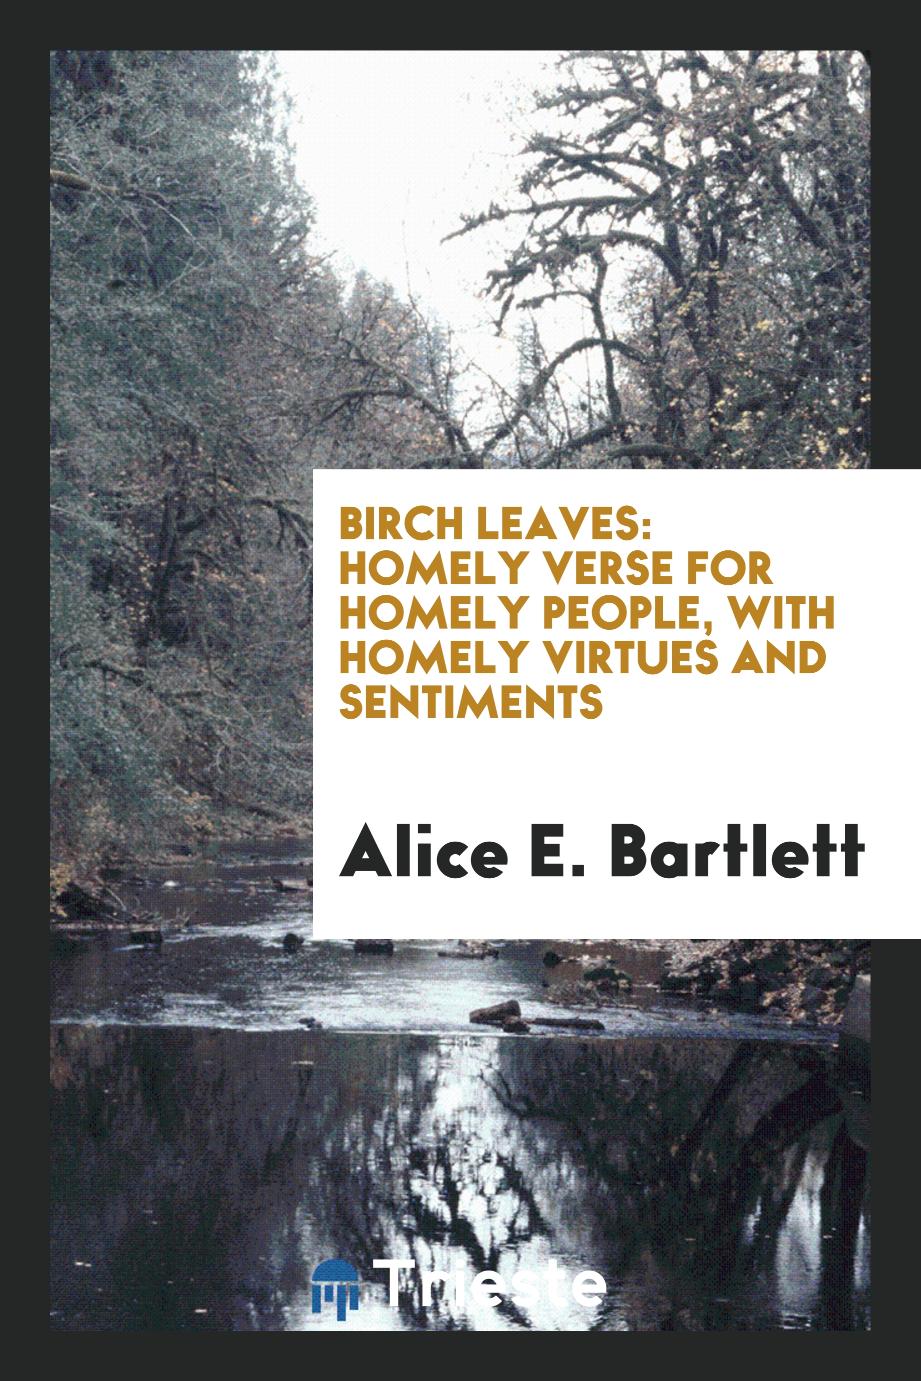 Birch Leaves: Homely Verse for Homely People, with Homely Virtues and Sentiments